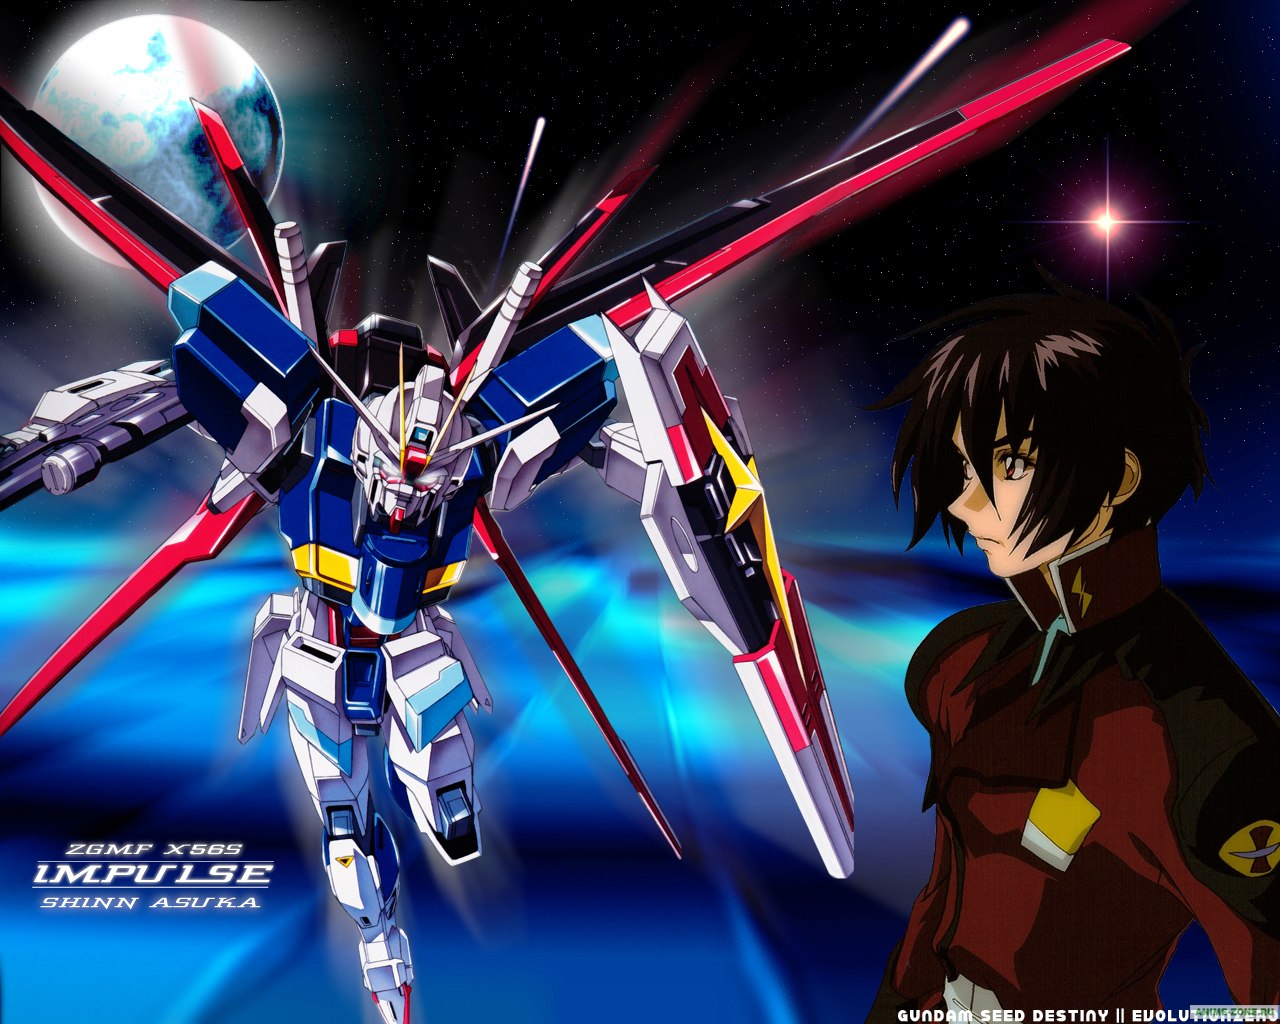 Free Download Gundam Seed Destiny Images Gundam Seed Destiny Hd Wallpaper And 1280x1024 For Your Desktop Mobile Tablet Explore 73 Gundam Seed Destiny Wallpaper Gundam Seed Wallpaper Gundam X Wallpaper